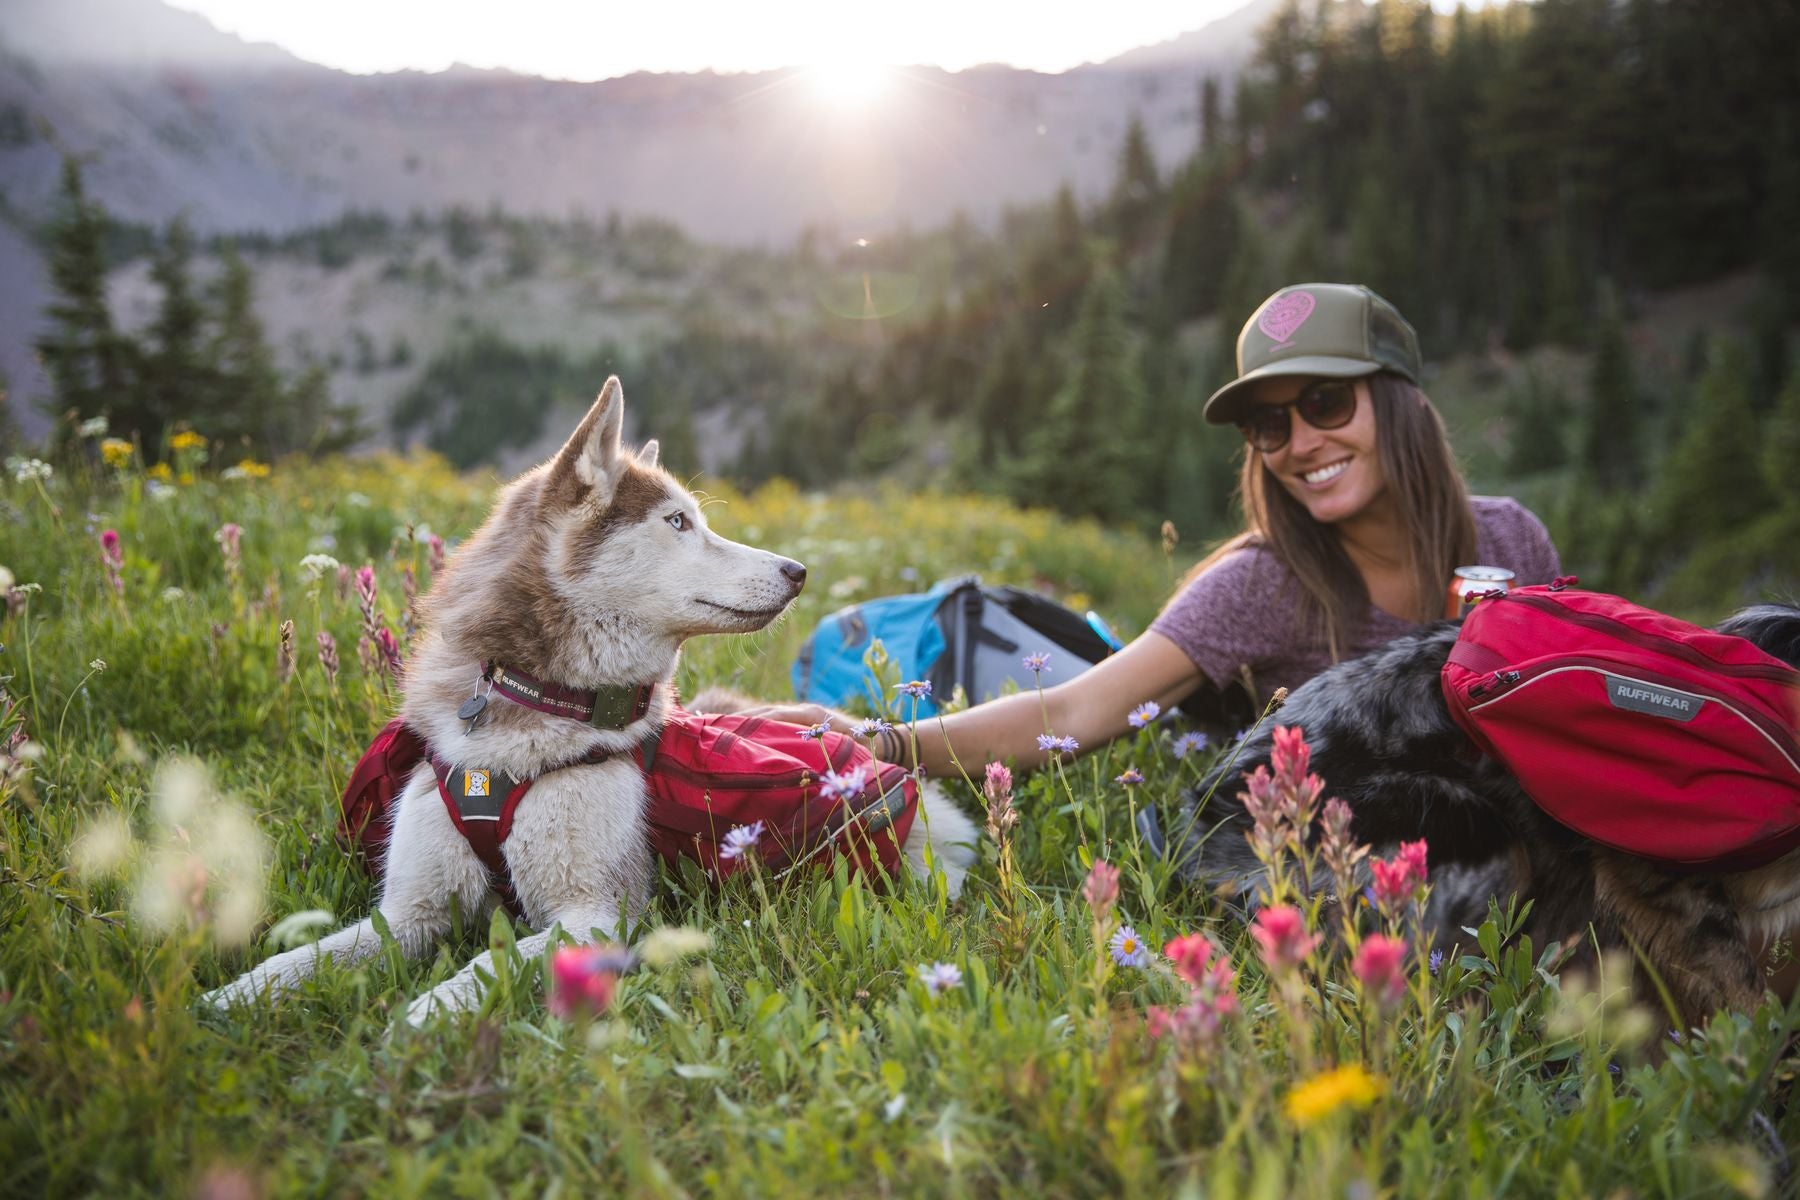 Dogs in palisades packs lay in wildflowers with human while backpacking.